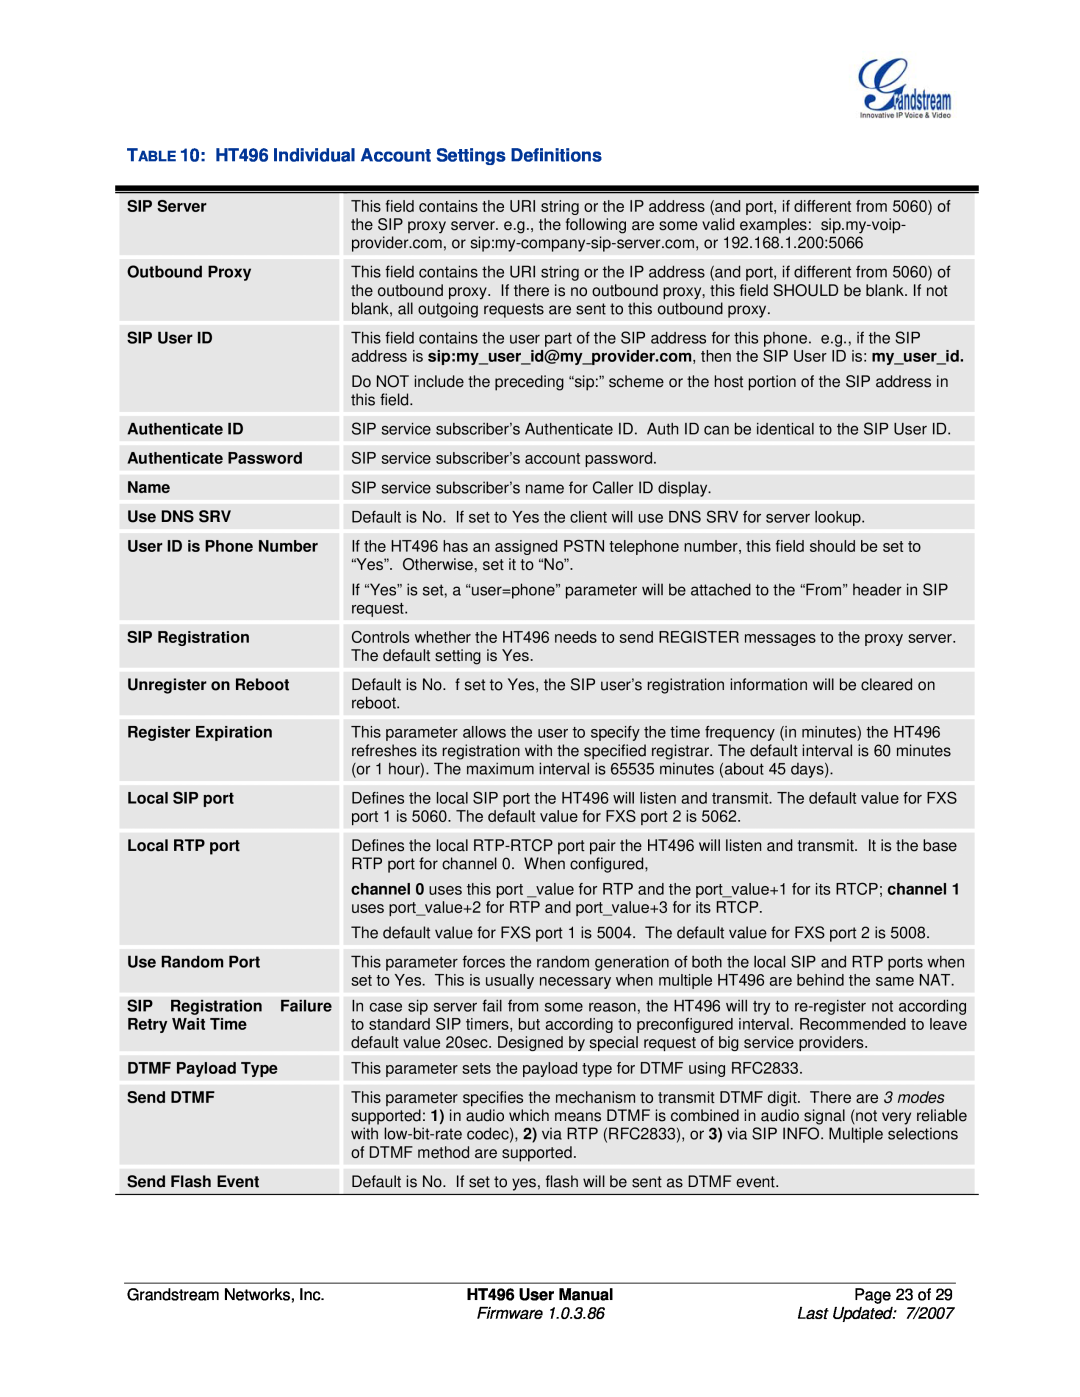 Grandstream Networks user manual HT496 Individual Account Settings Definitions 